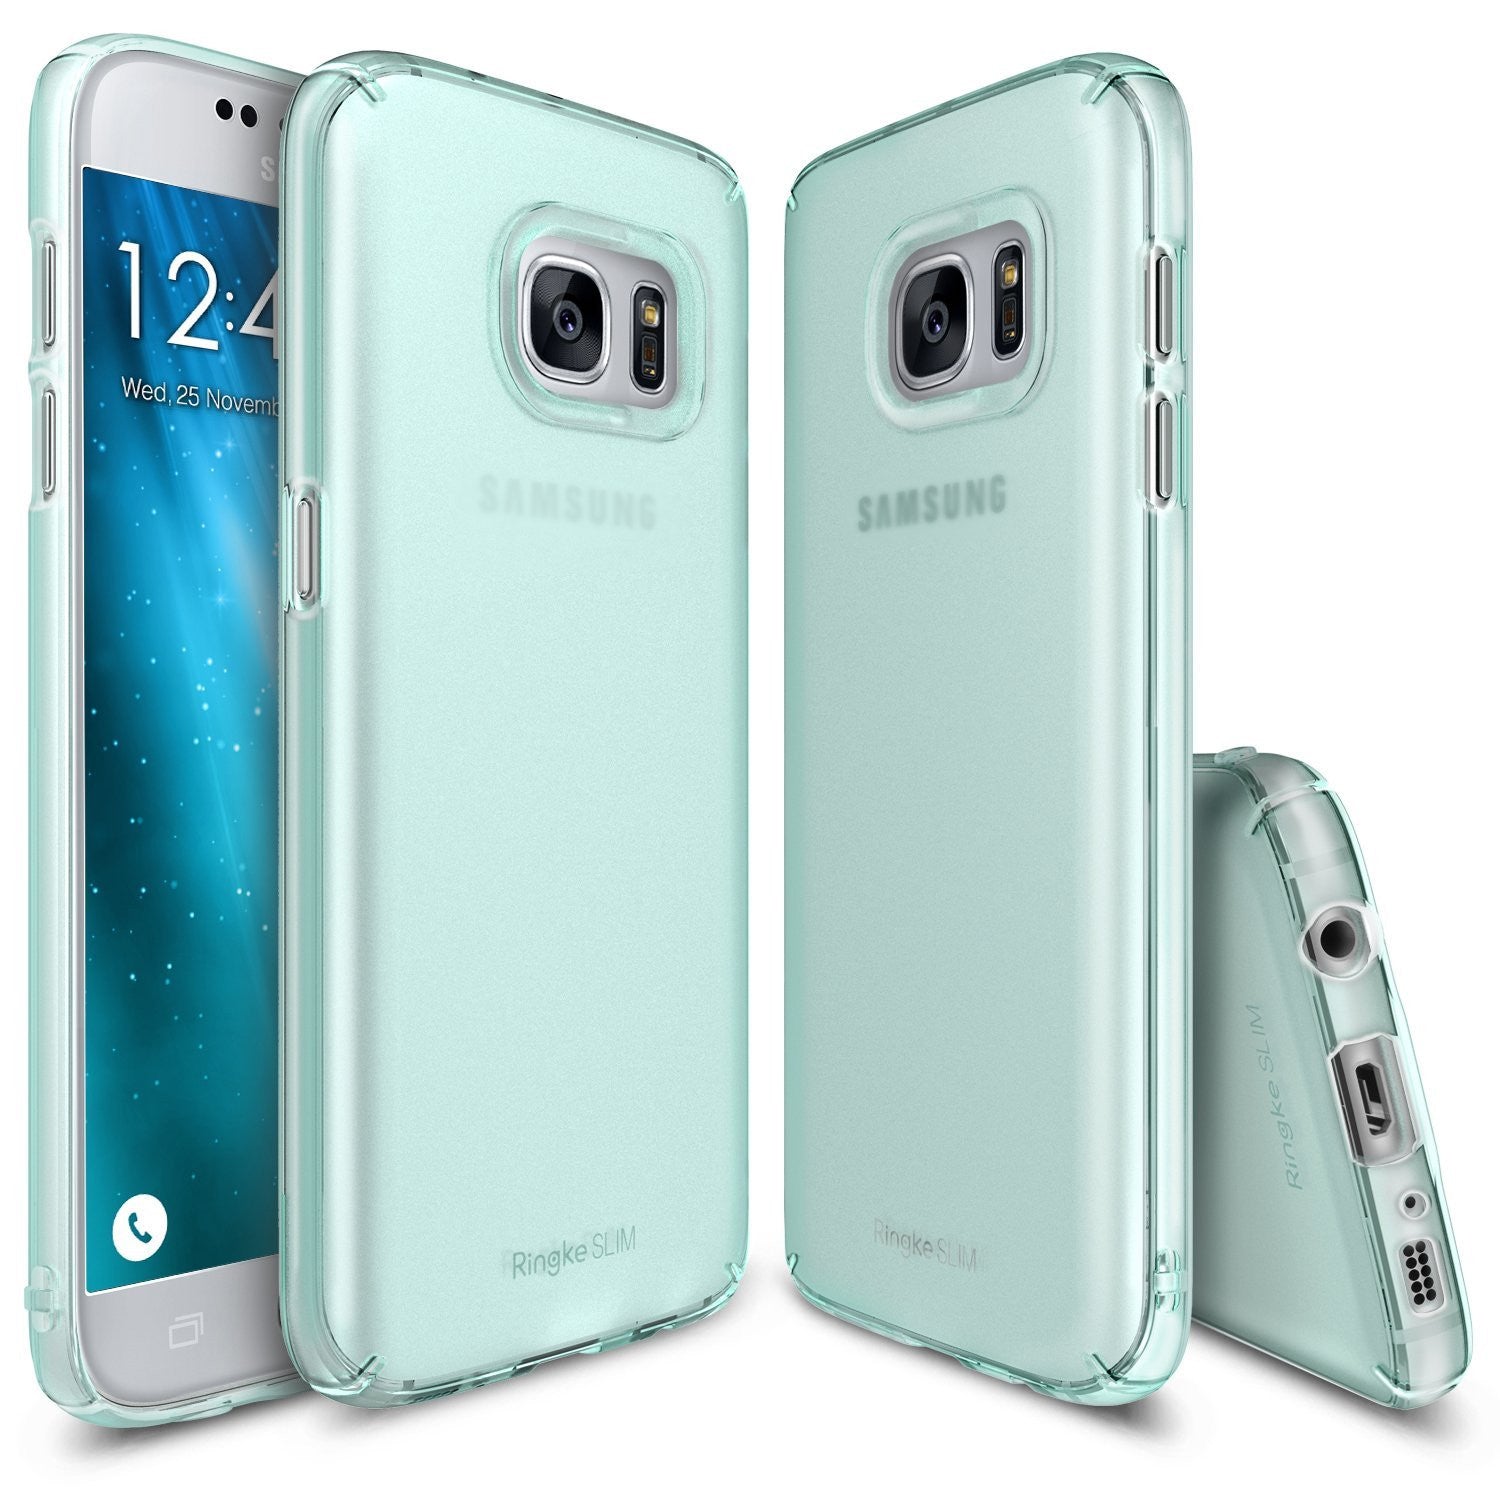 ringke slim premium pc hard cover case for galaxy s7 frost mint